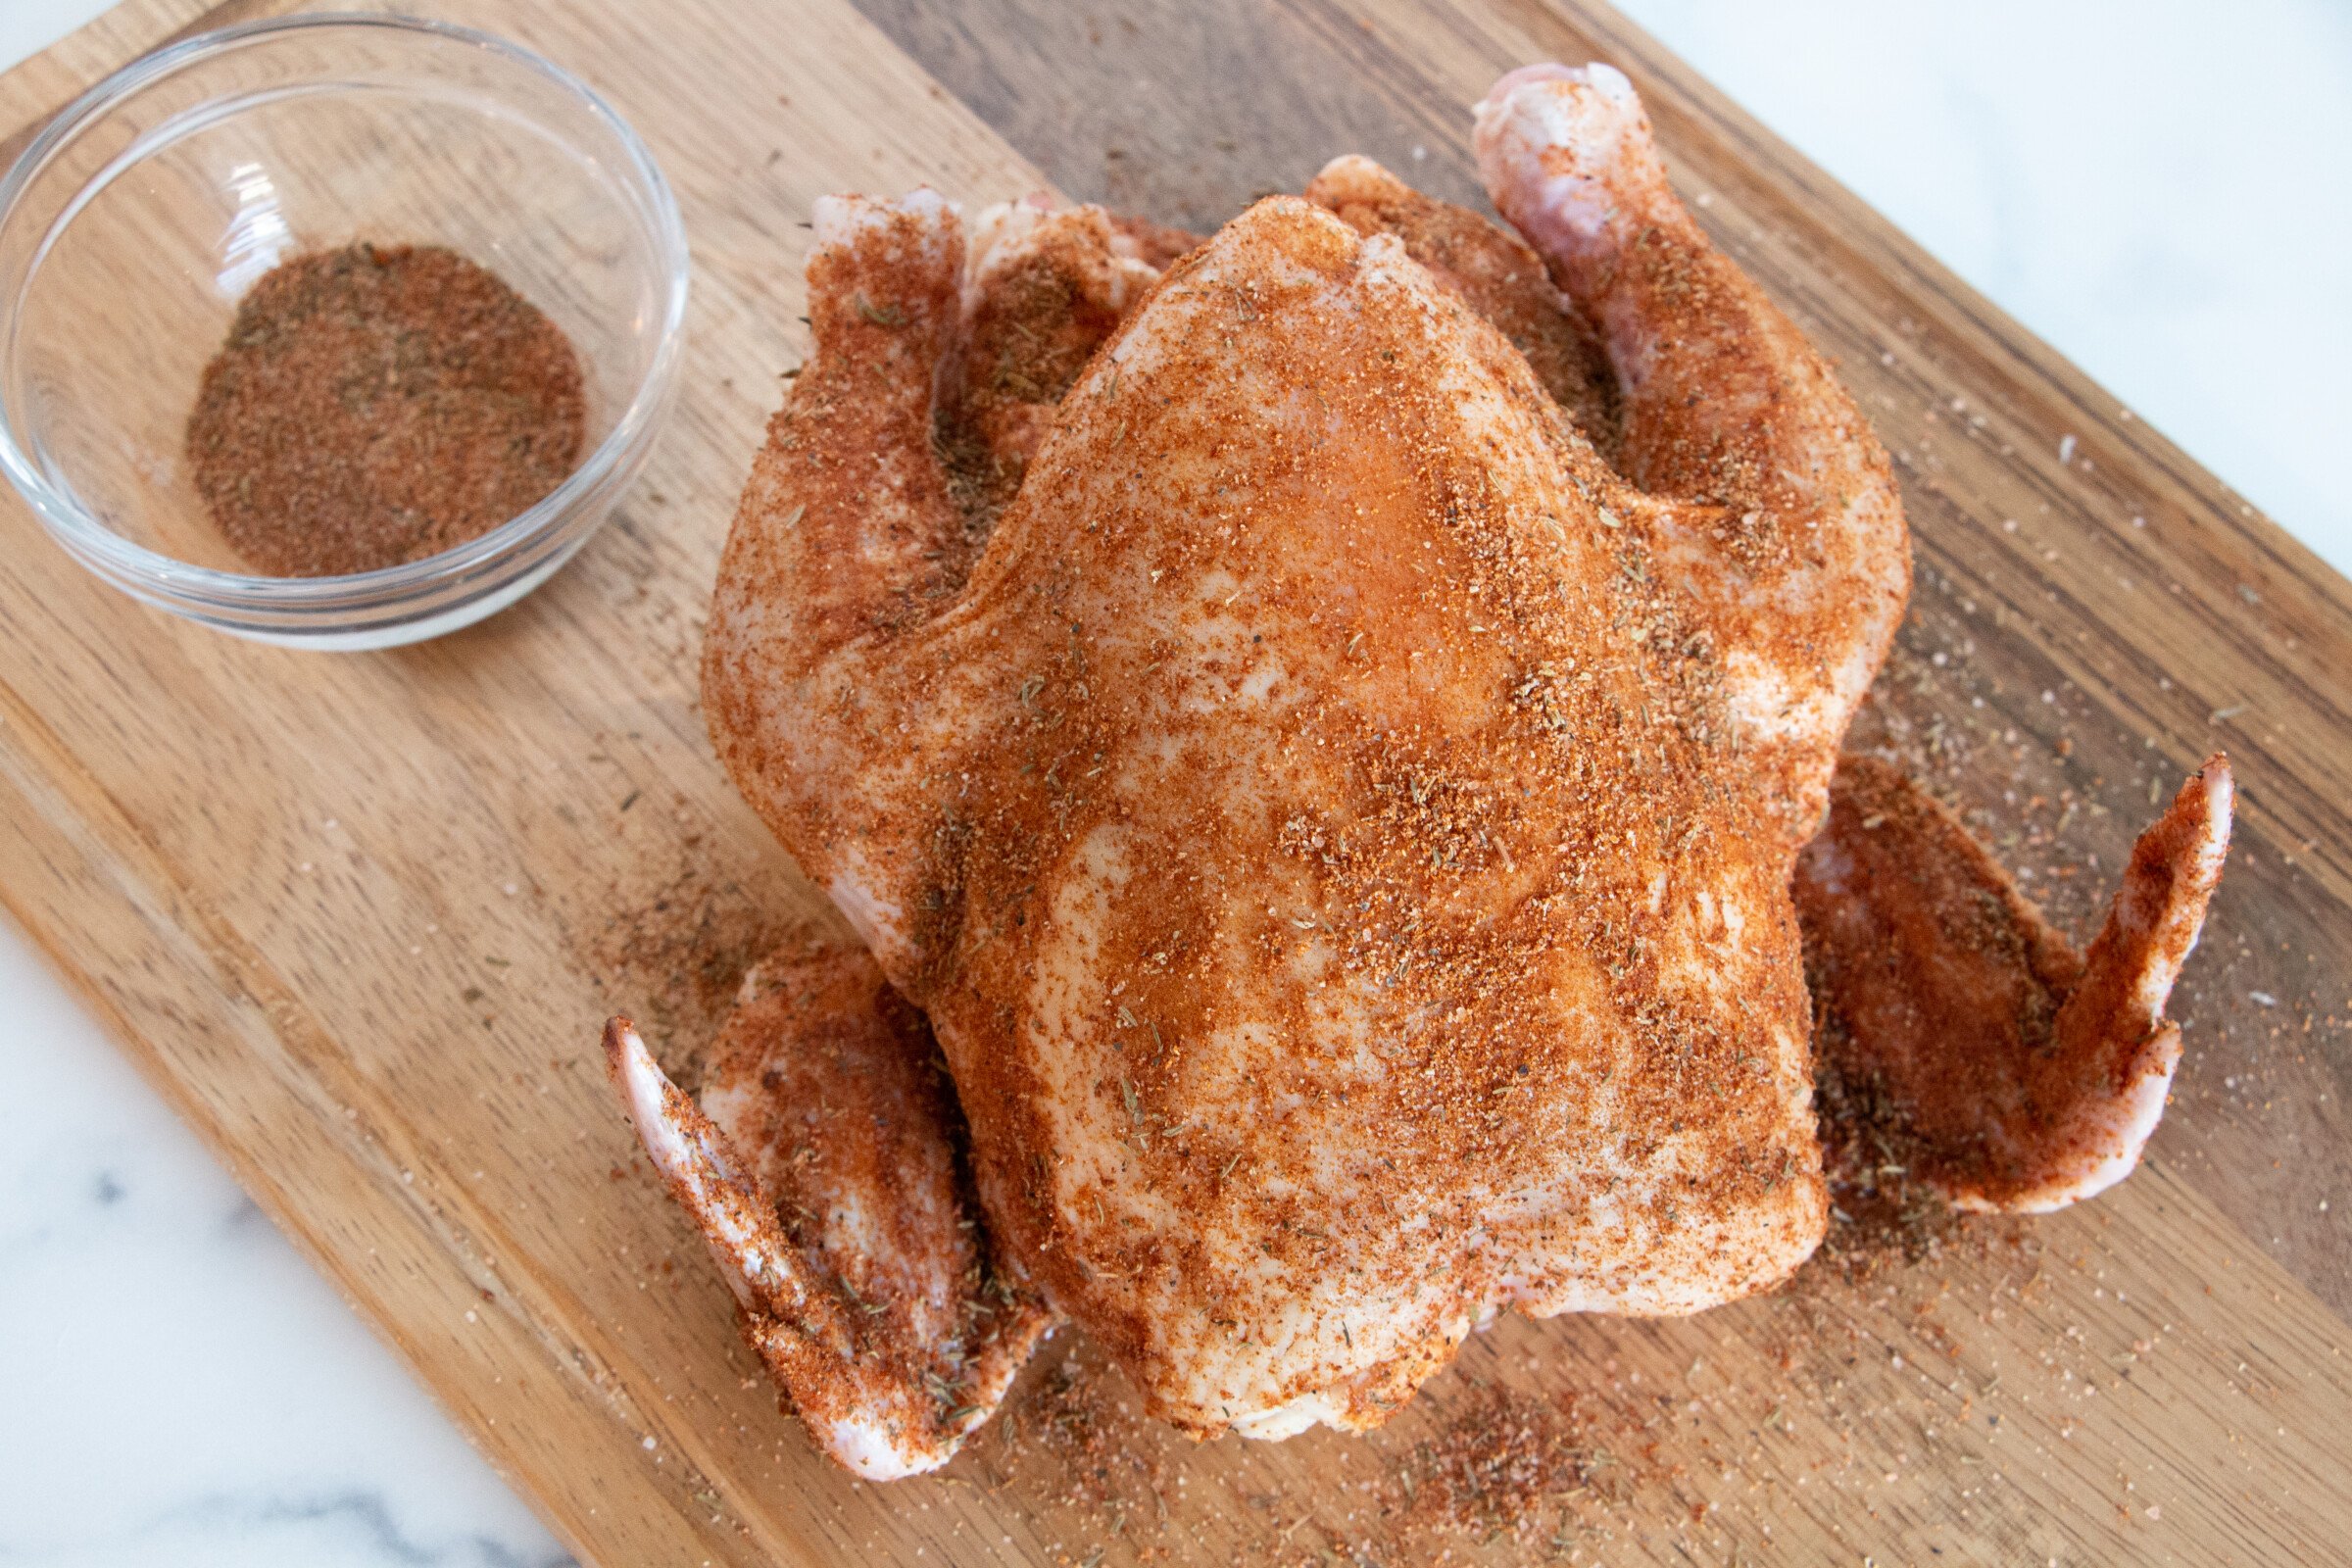 Whole chicken rubbed with rotisserie style spices. It is ready to be added to a crock pot.